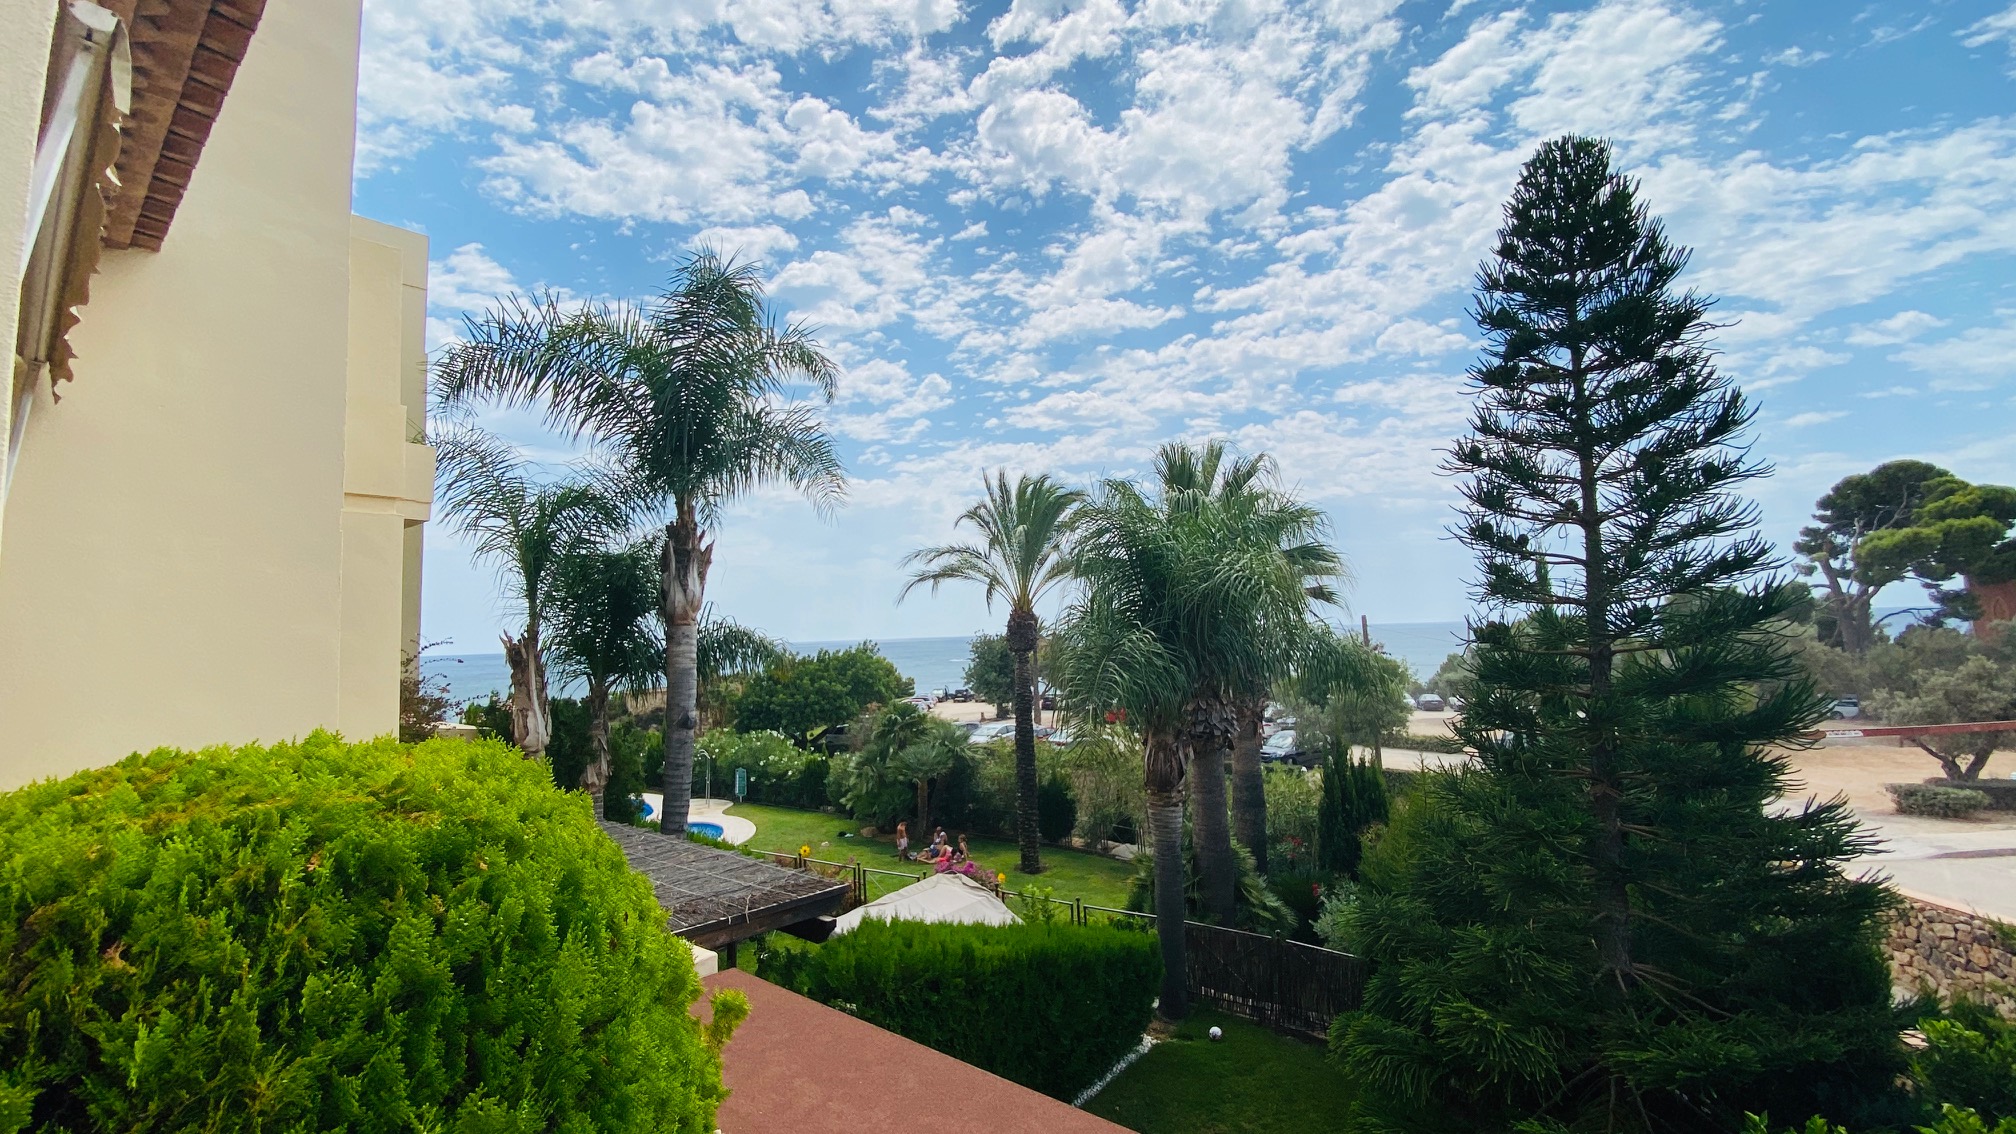 Frontline apartment with three bedrooms and two full bathrooms in a luxury urbanization Villa Gadea, Altea. Sea views,beautiful gardens and community pool